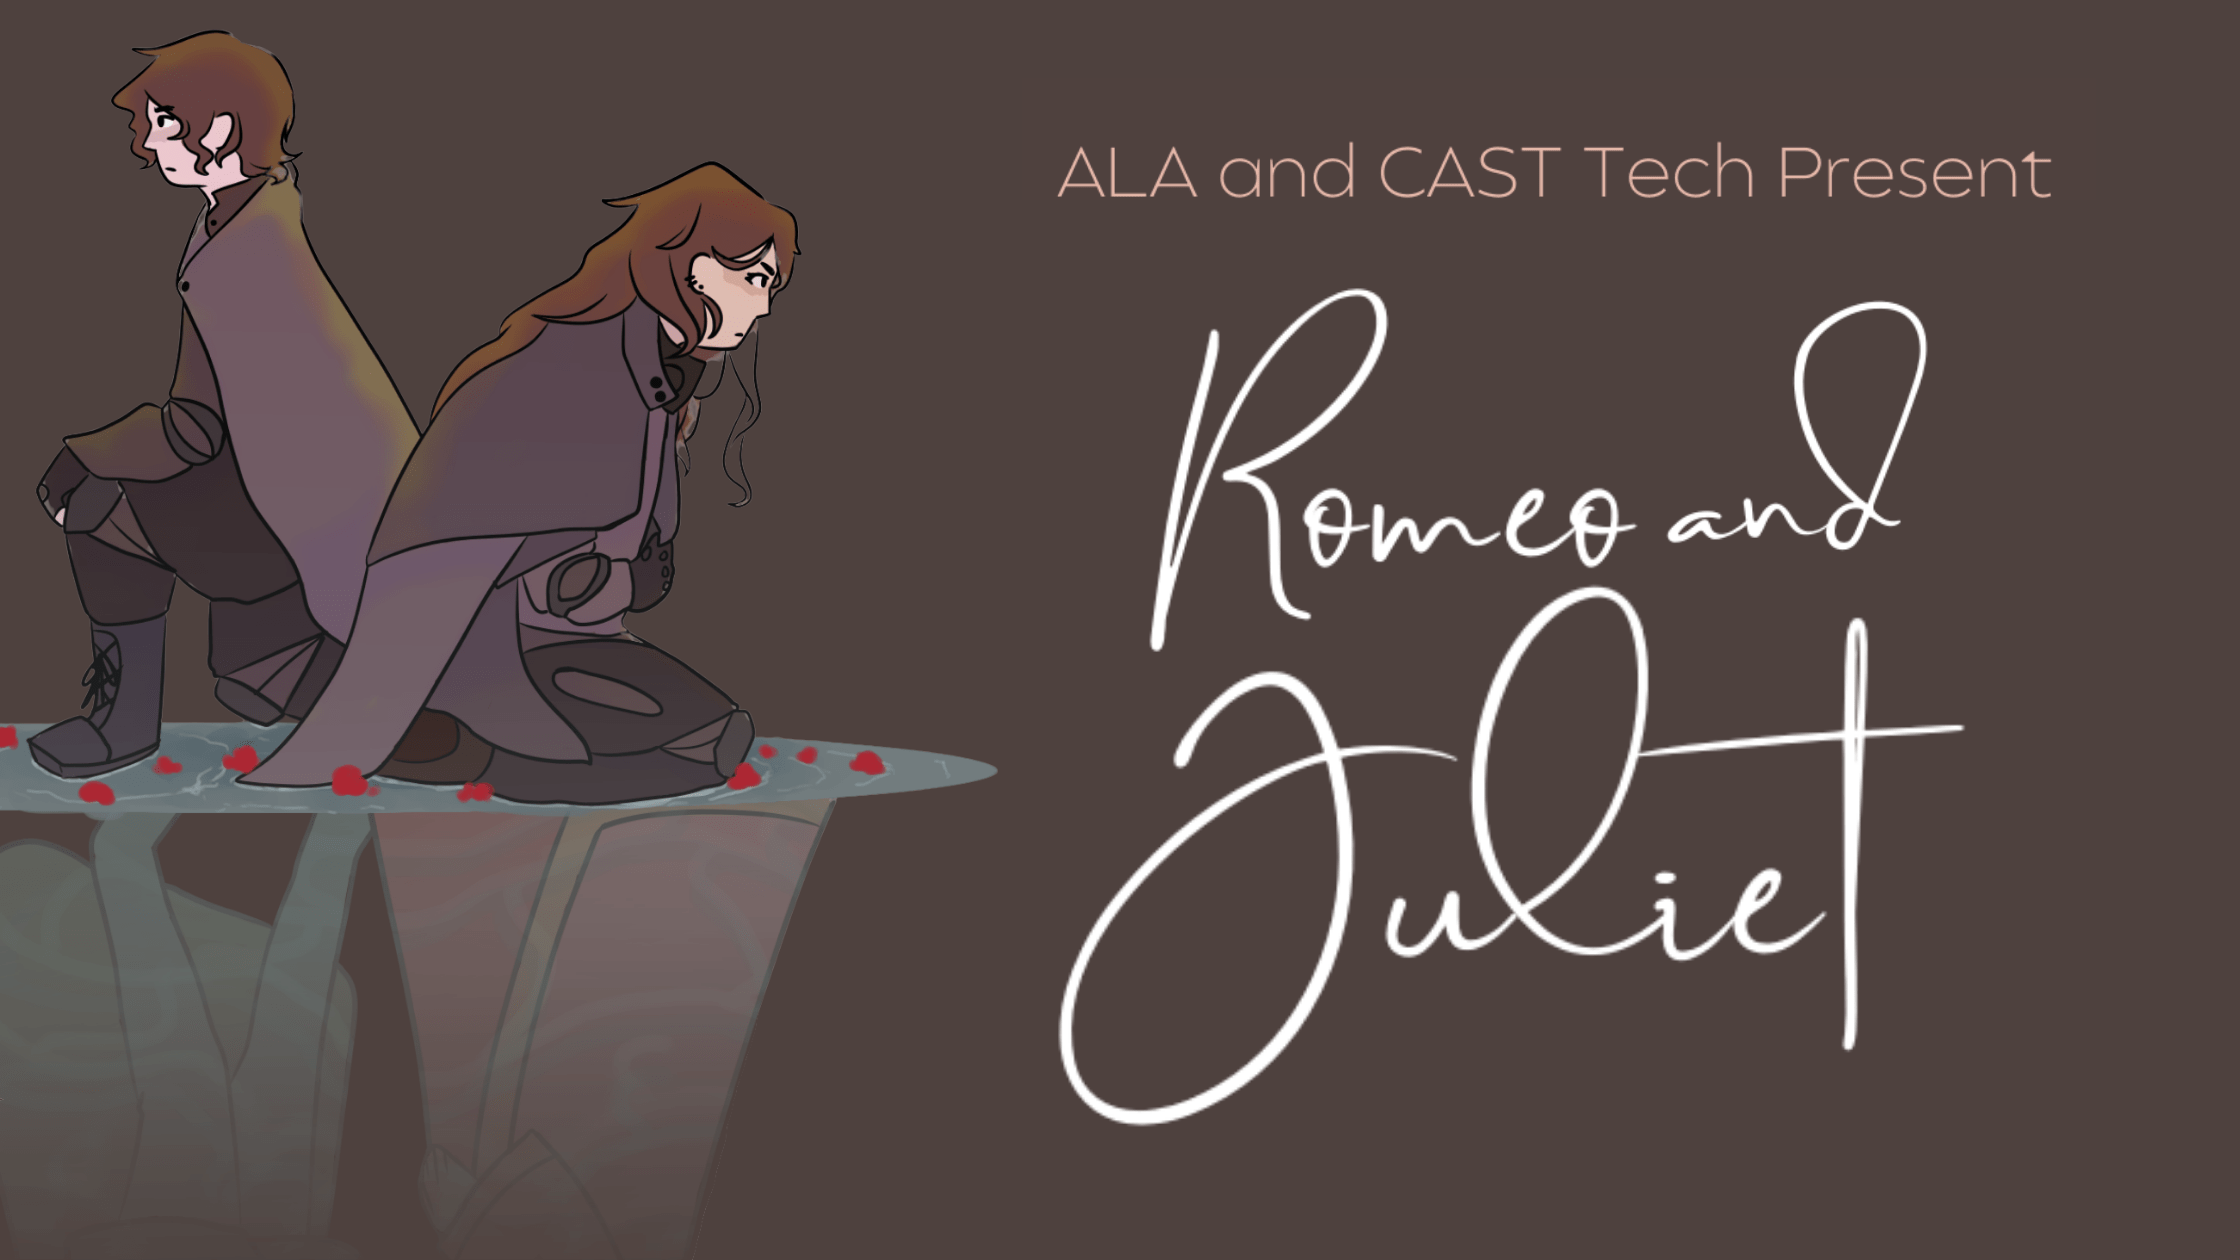 Advanced Learning Academy and CAST Tech Present Romeo and Juliet